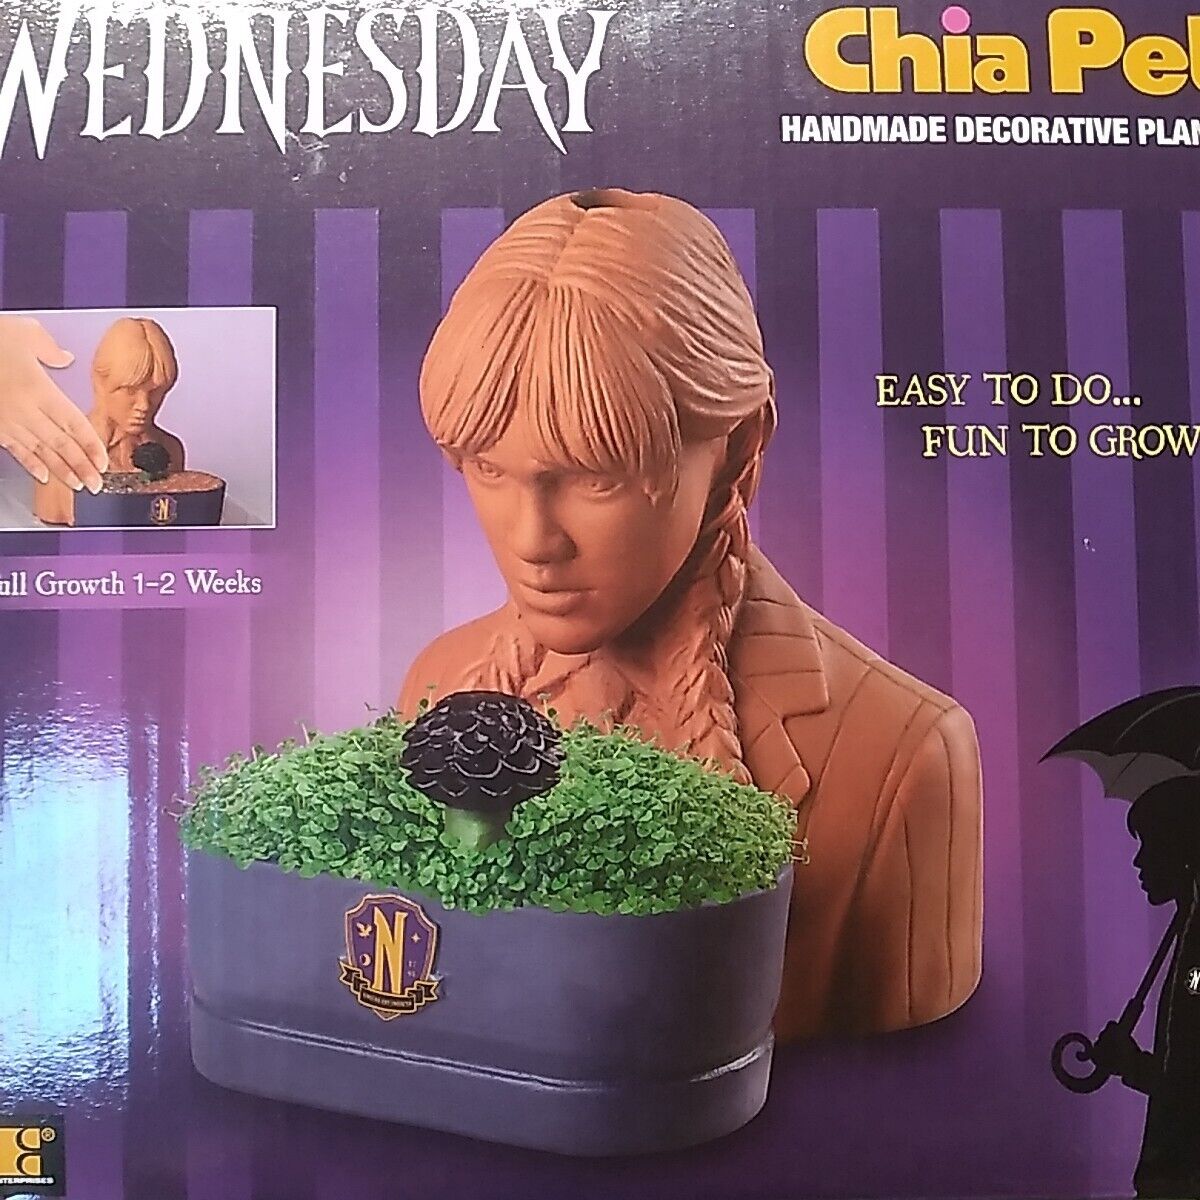 Chia Pet WEDNESDAY Decorative Pottery Planter Addam’s Family NEW in box,fastship